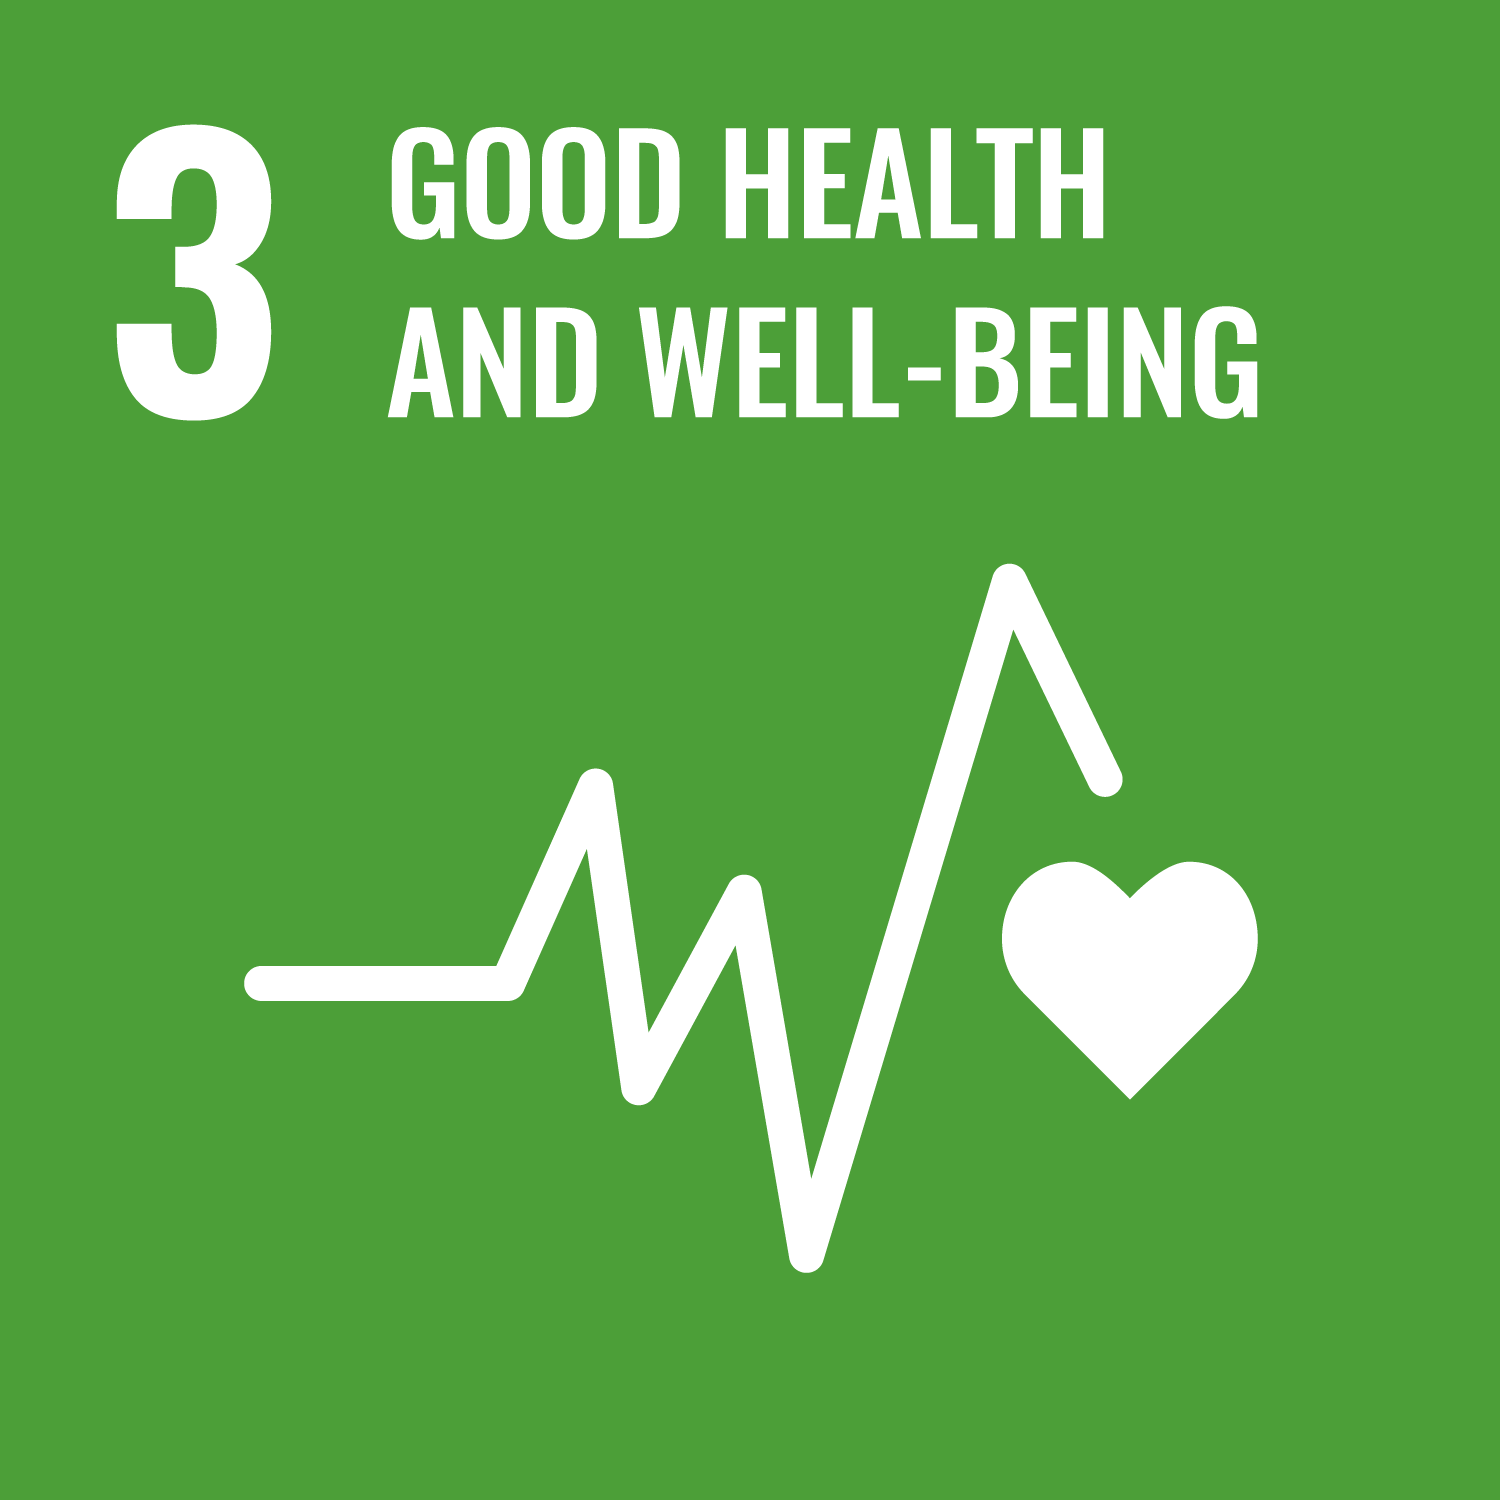 An icon for UN SDG #3 - Good Health and Well-Being. It depicts an ECG waveform with a heart.